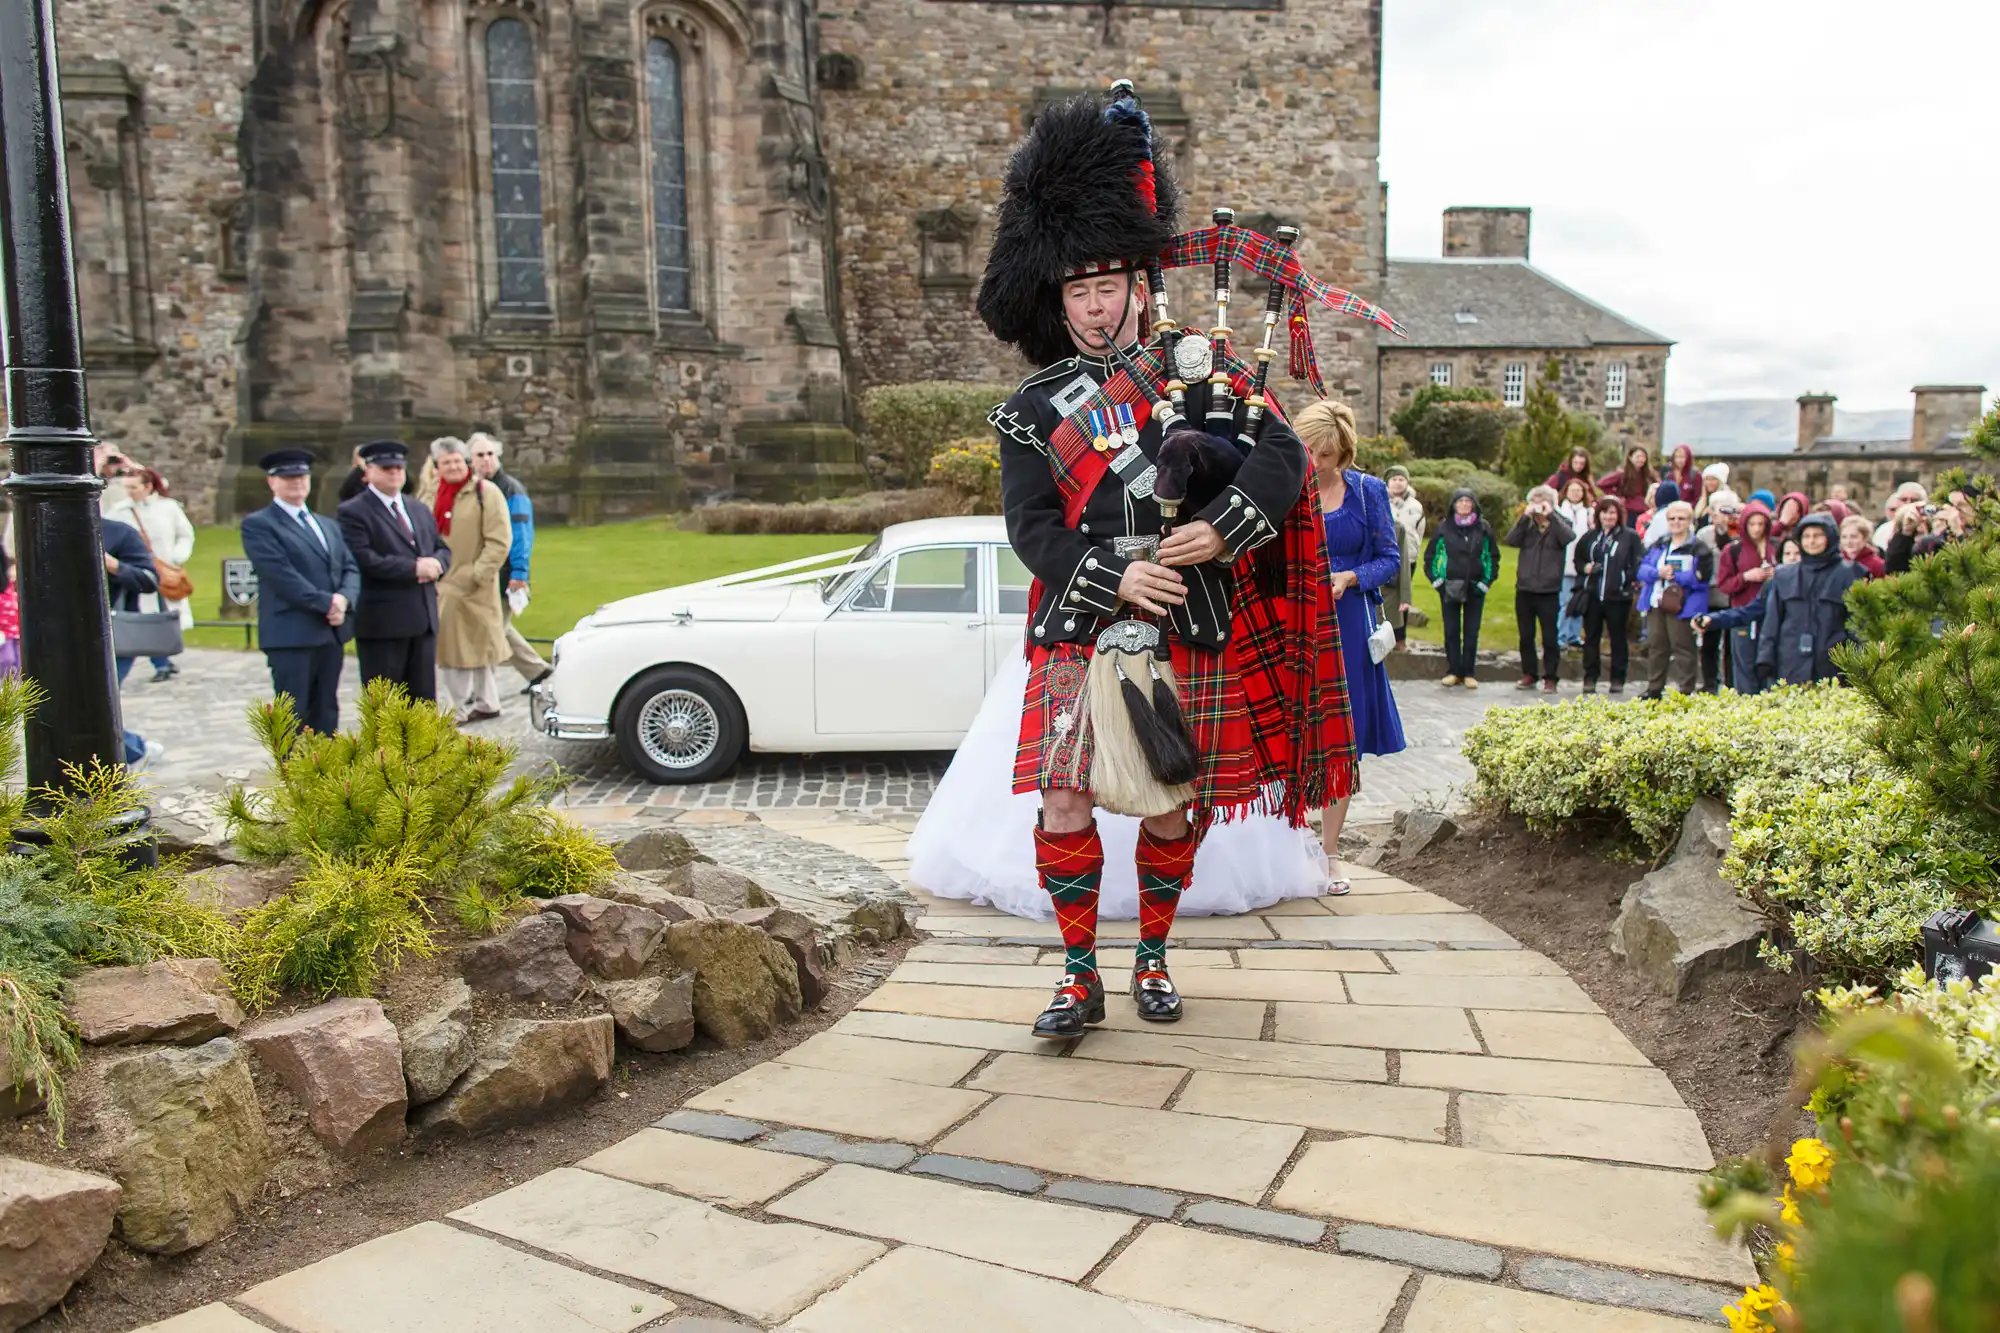 A scottish bagpiper in traditional attire leads a bride towards a vintage car, with onlookers gathered around in a historic setting.